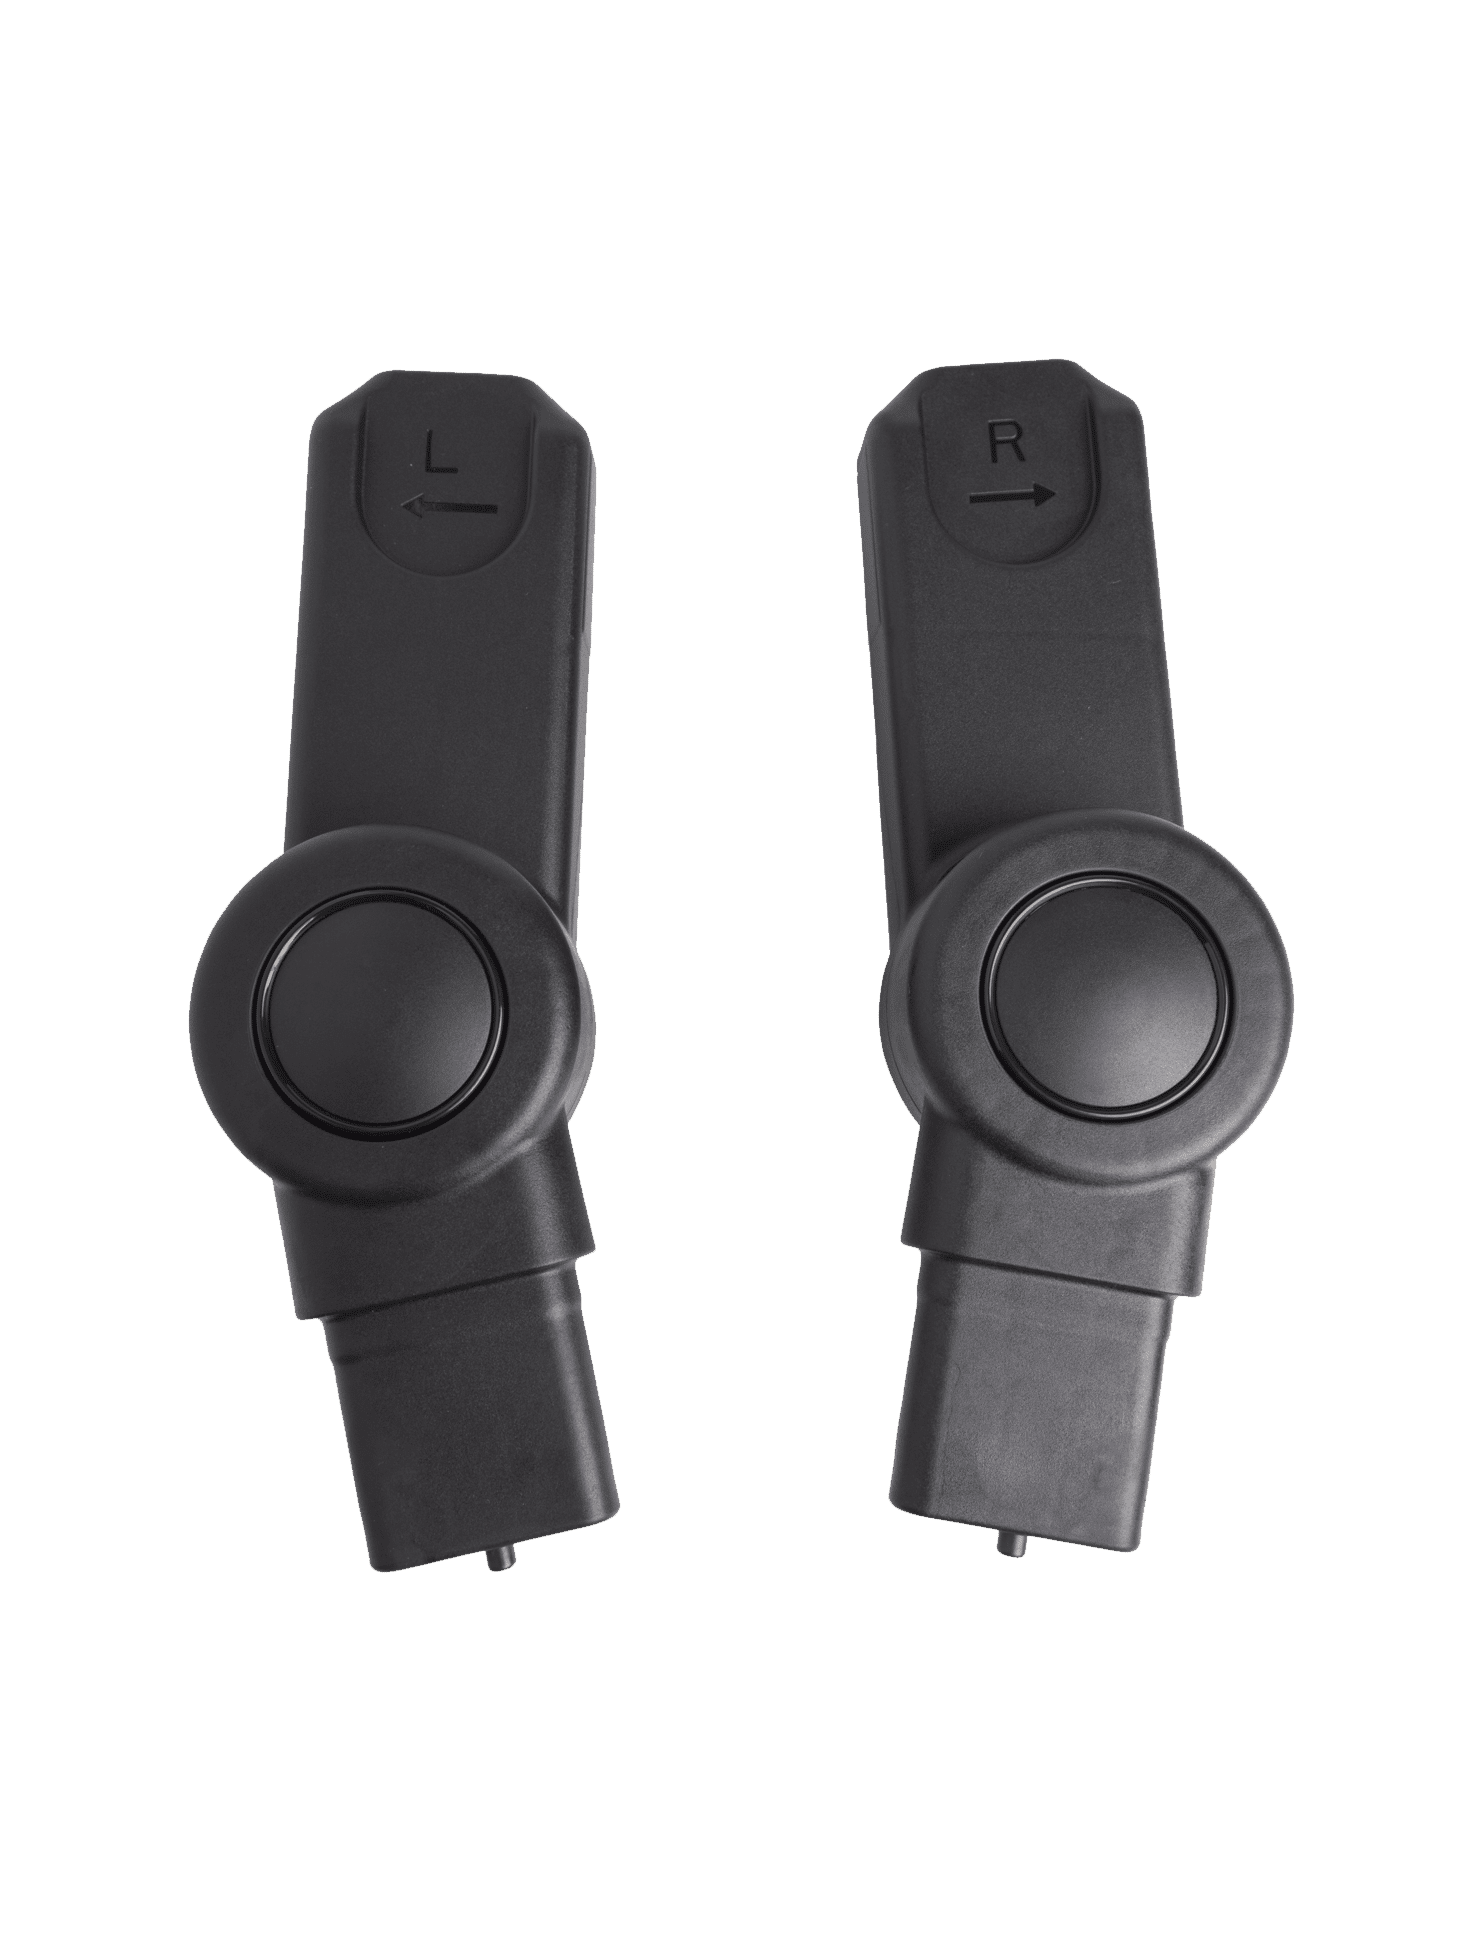 Icandy Peach Lower Adapters for Maxi Cosi Car Seats 